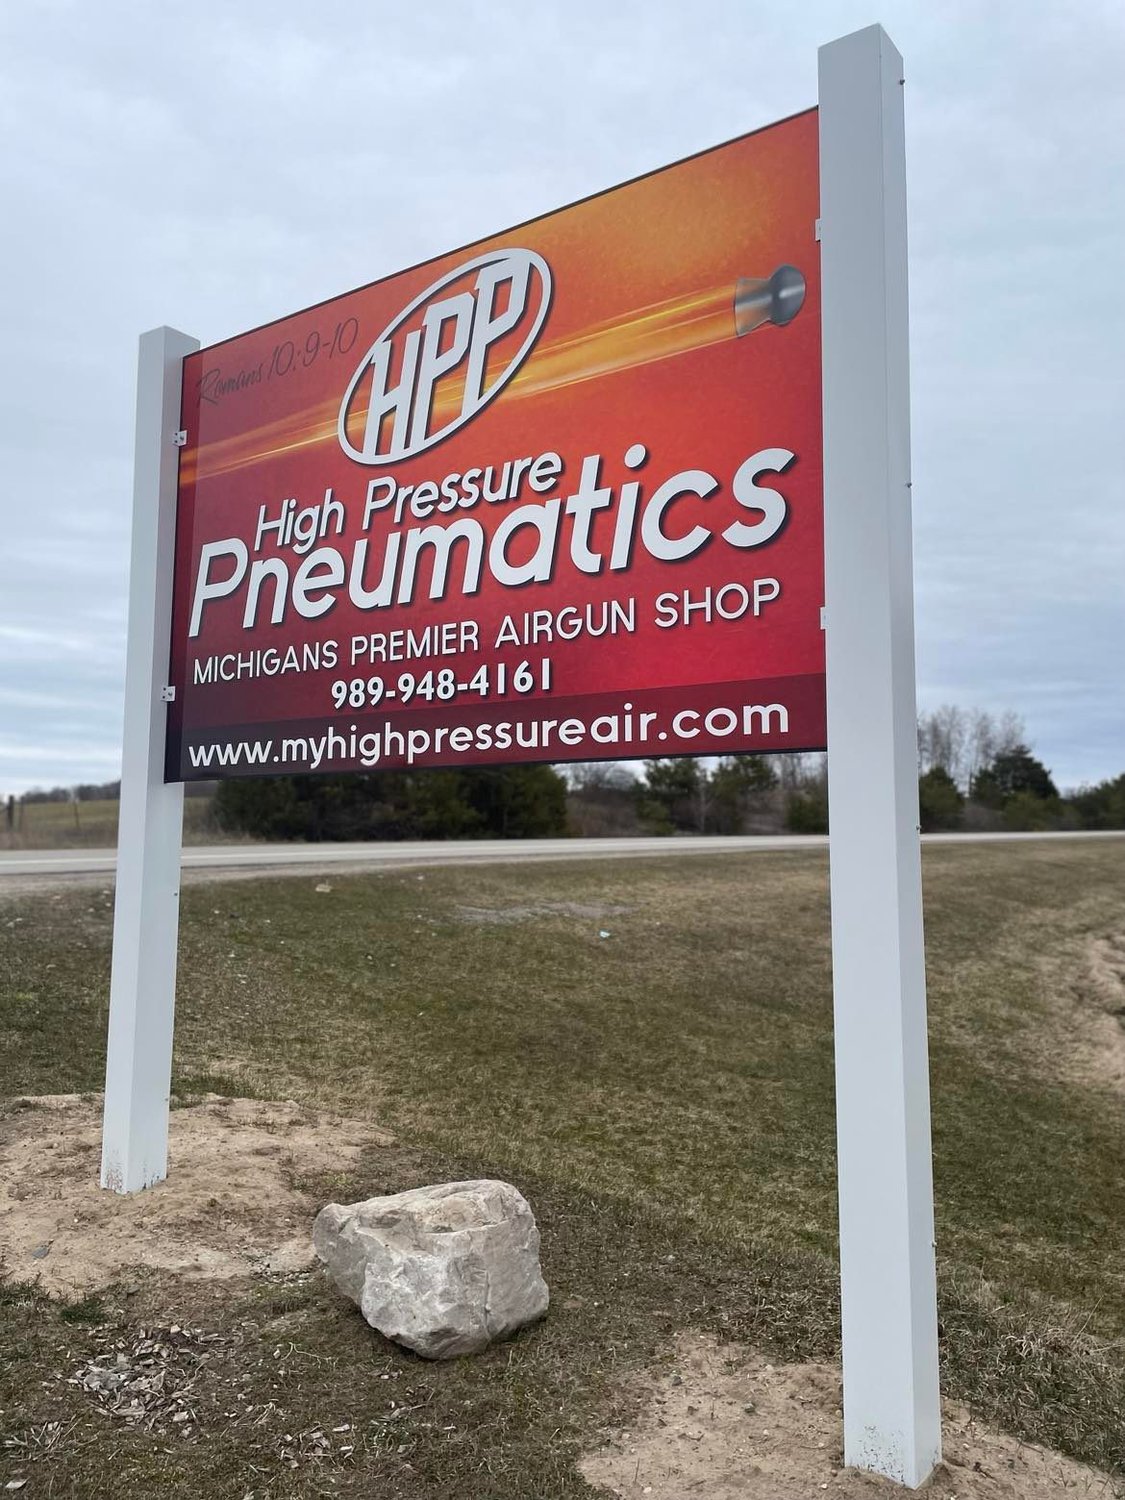 HPP is located at 1721 W. Temple Drive, west of Harrison. Visit them online at www.myhighpressureair.com or their Facebook page High Pressure Pneumatics.